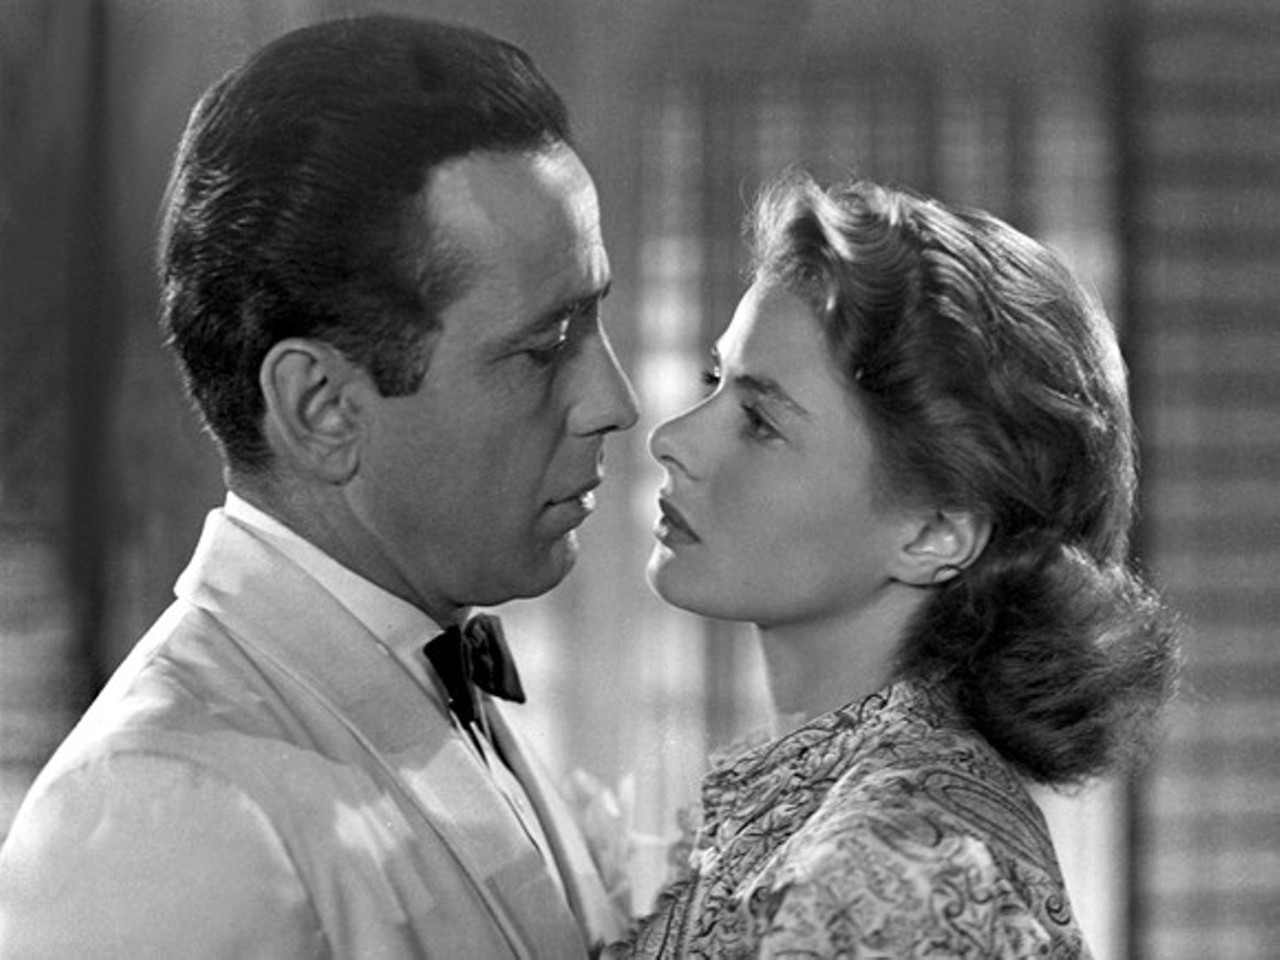 Tuesday, 2/14
Casablanca
@ Max M. Fisher Music Center
Here&#146;s looking at you kid! This special screening of the 1942 classic features Max Steiner&#146;s Oscar-nominated score played live by the Detroit Symphony Orchestra, adding an extra dramatic dimension. There&#146;s a reason Casablanca is a gem. Valentine&#146;s Day packages include Champagne, chocolate truffles, a long-stem rose, and a three-course menu. Whether you know the film by heart or haven&#146;t seen it yet but are aware of its cinematic legacy, this screening is sure to be memorable.
Starts at 7:30 p.m.; 3711 Woodward Ave., Detroit; 313.576.5111; dso.org; tickets are $35-$100.